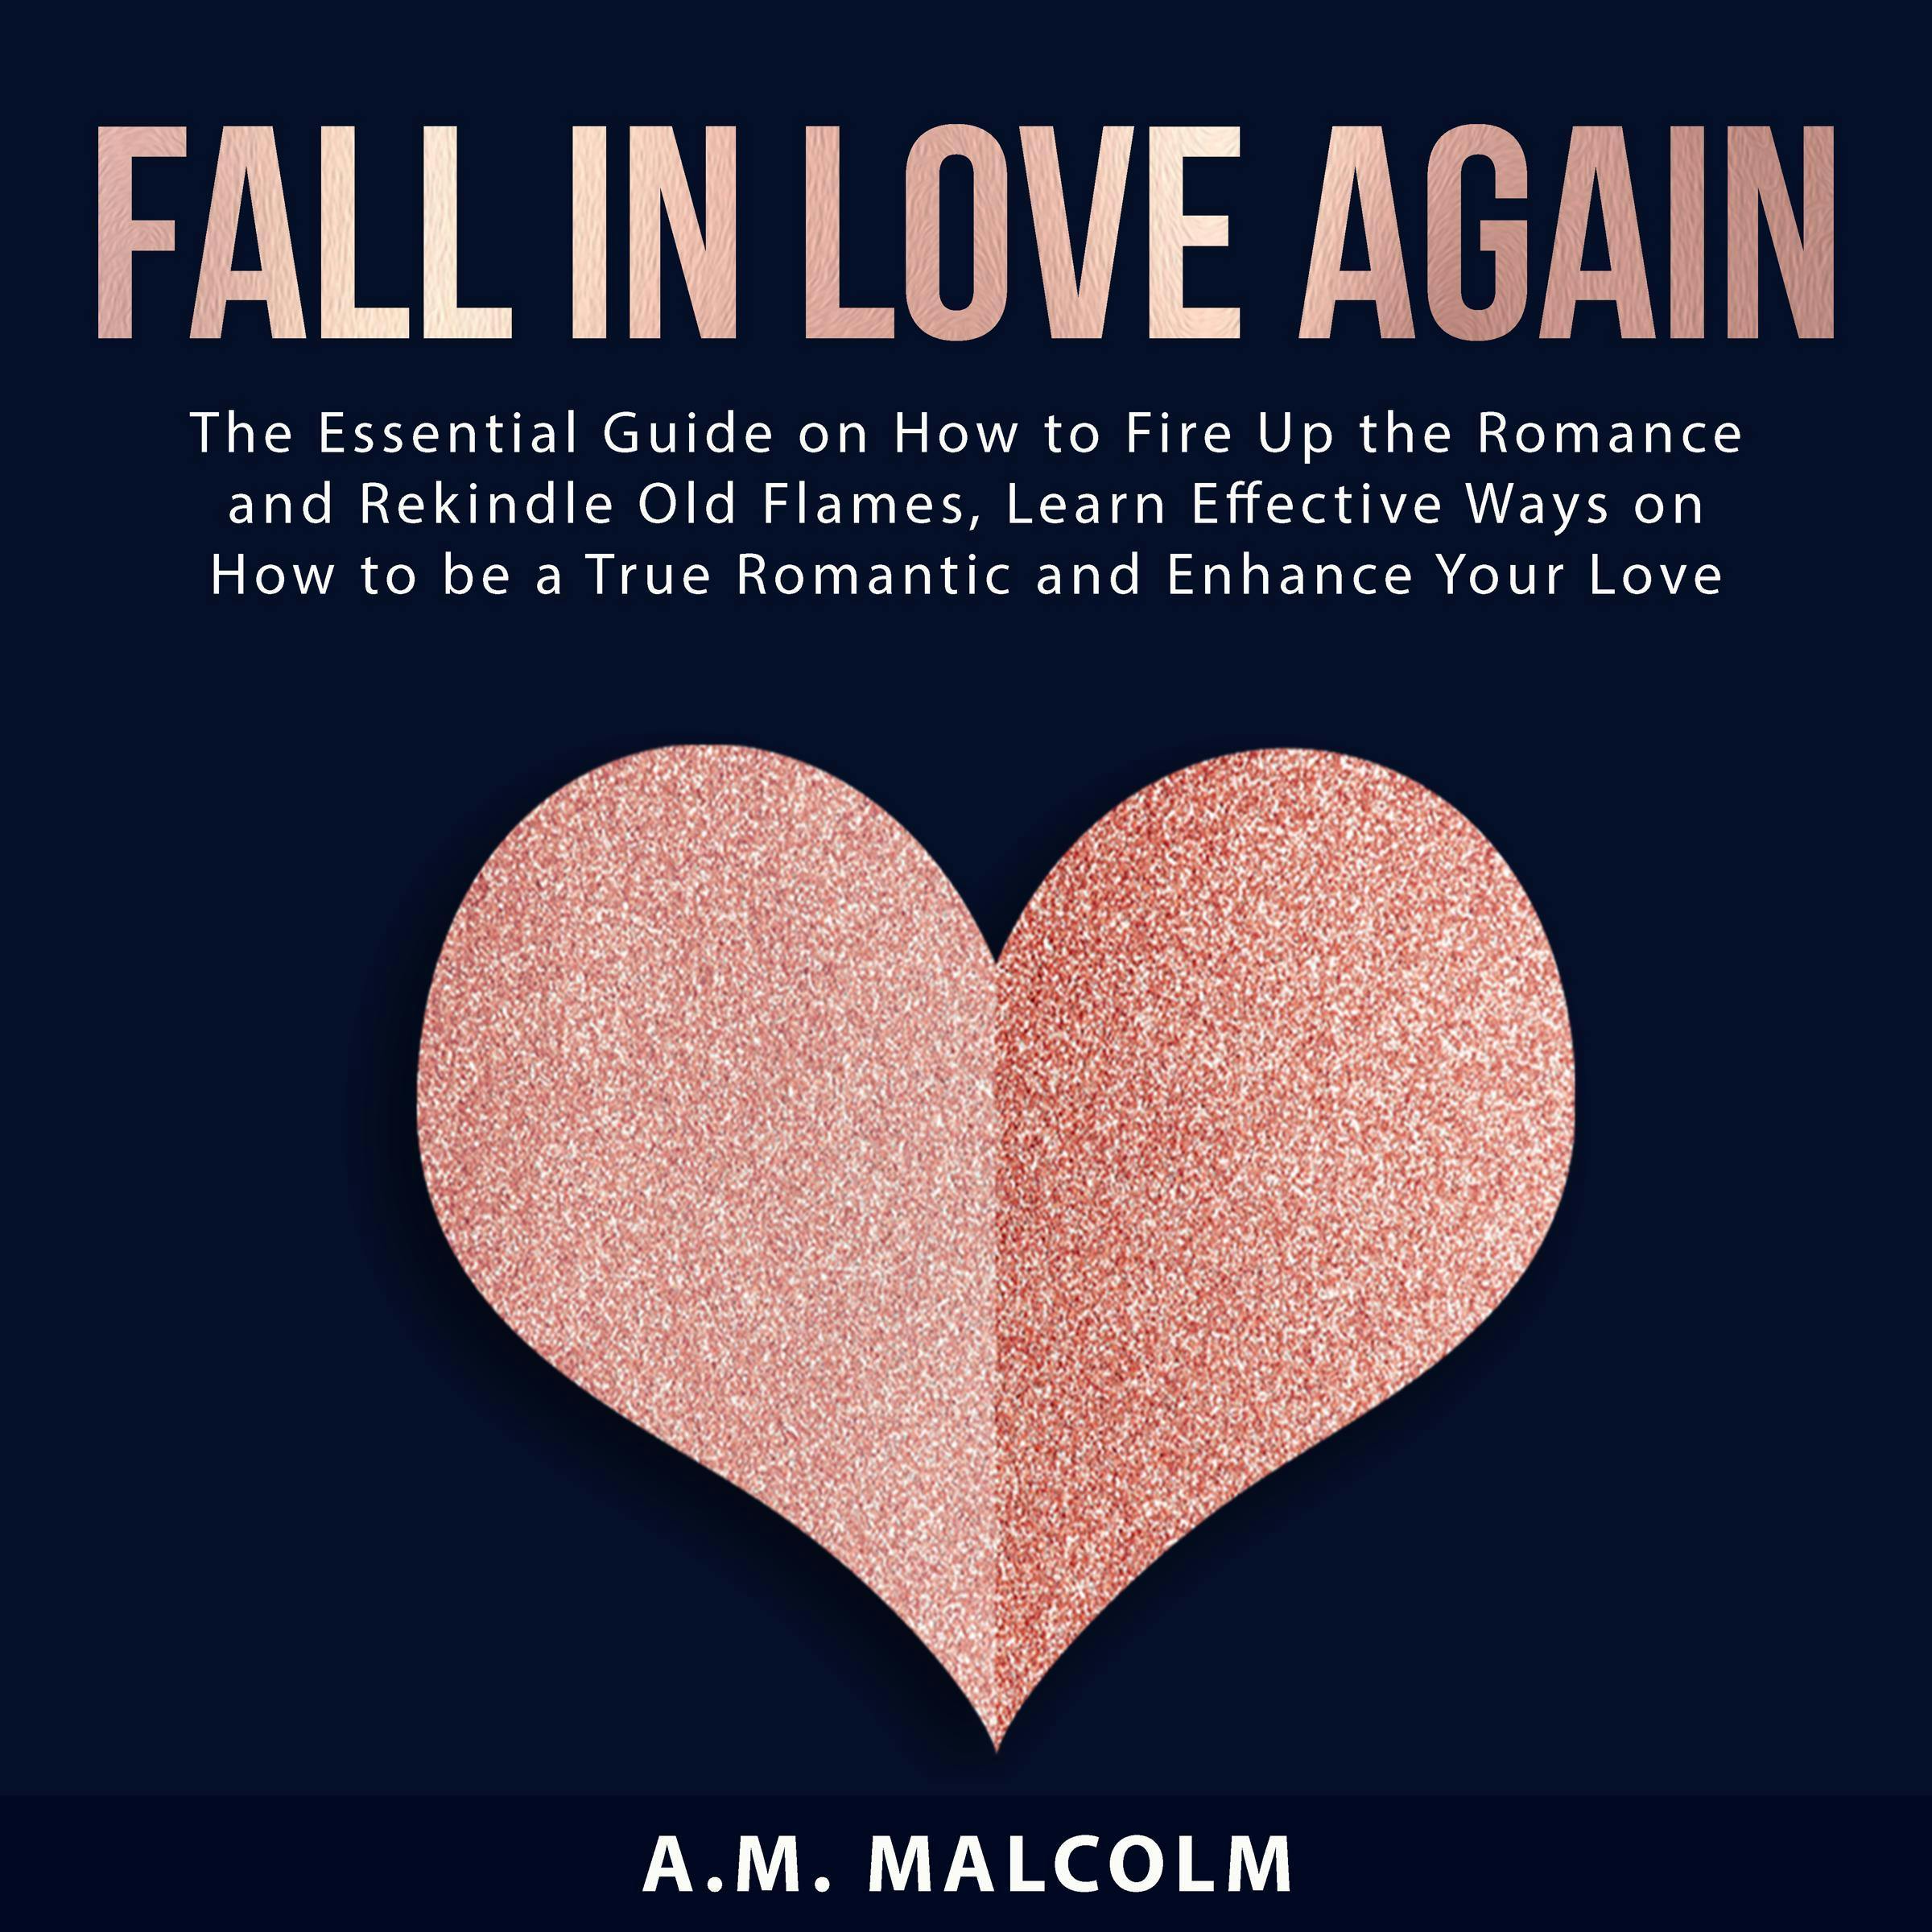 Fall in Love Again: The Essential Guide on How to Fire Up the Romance and Rekindle Old Flames, Learn Effective Ways on How to be a True Romantic and Enhance Your Love Life - A.M. Malcolm